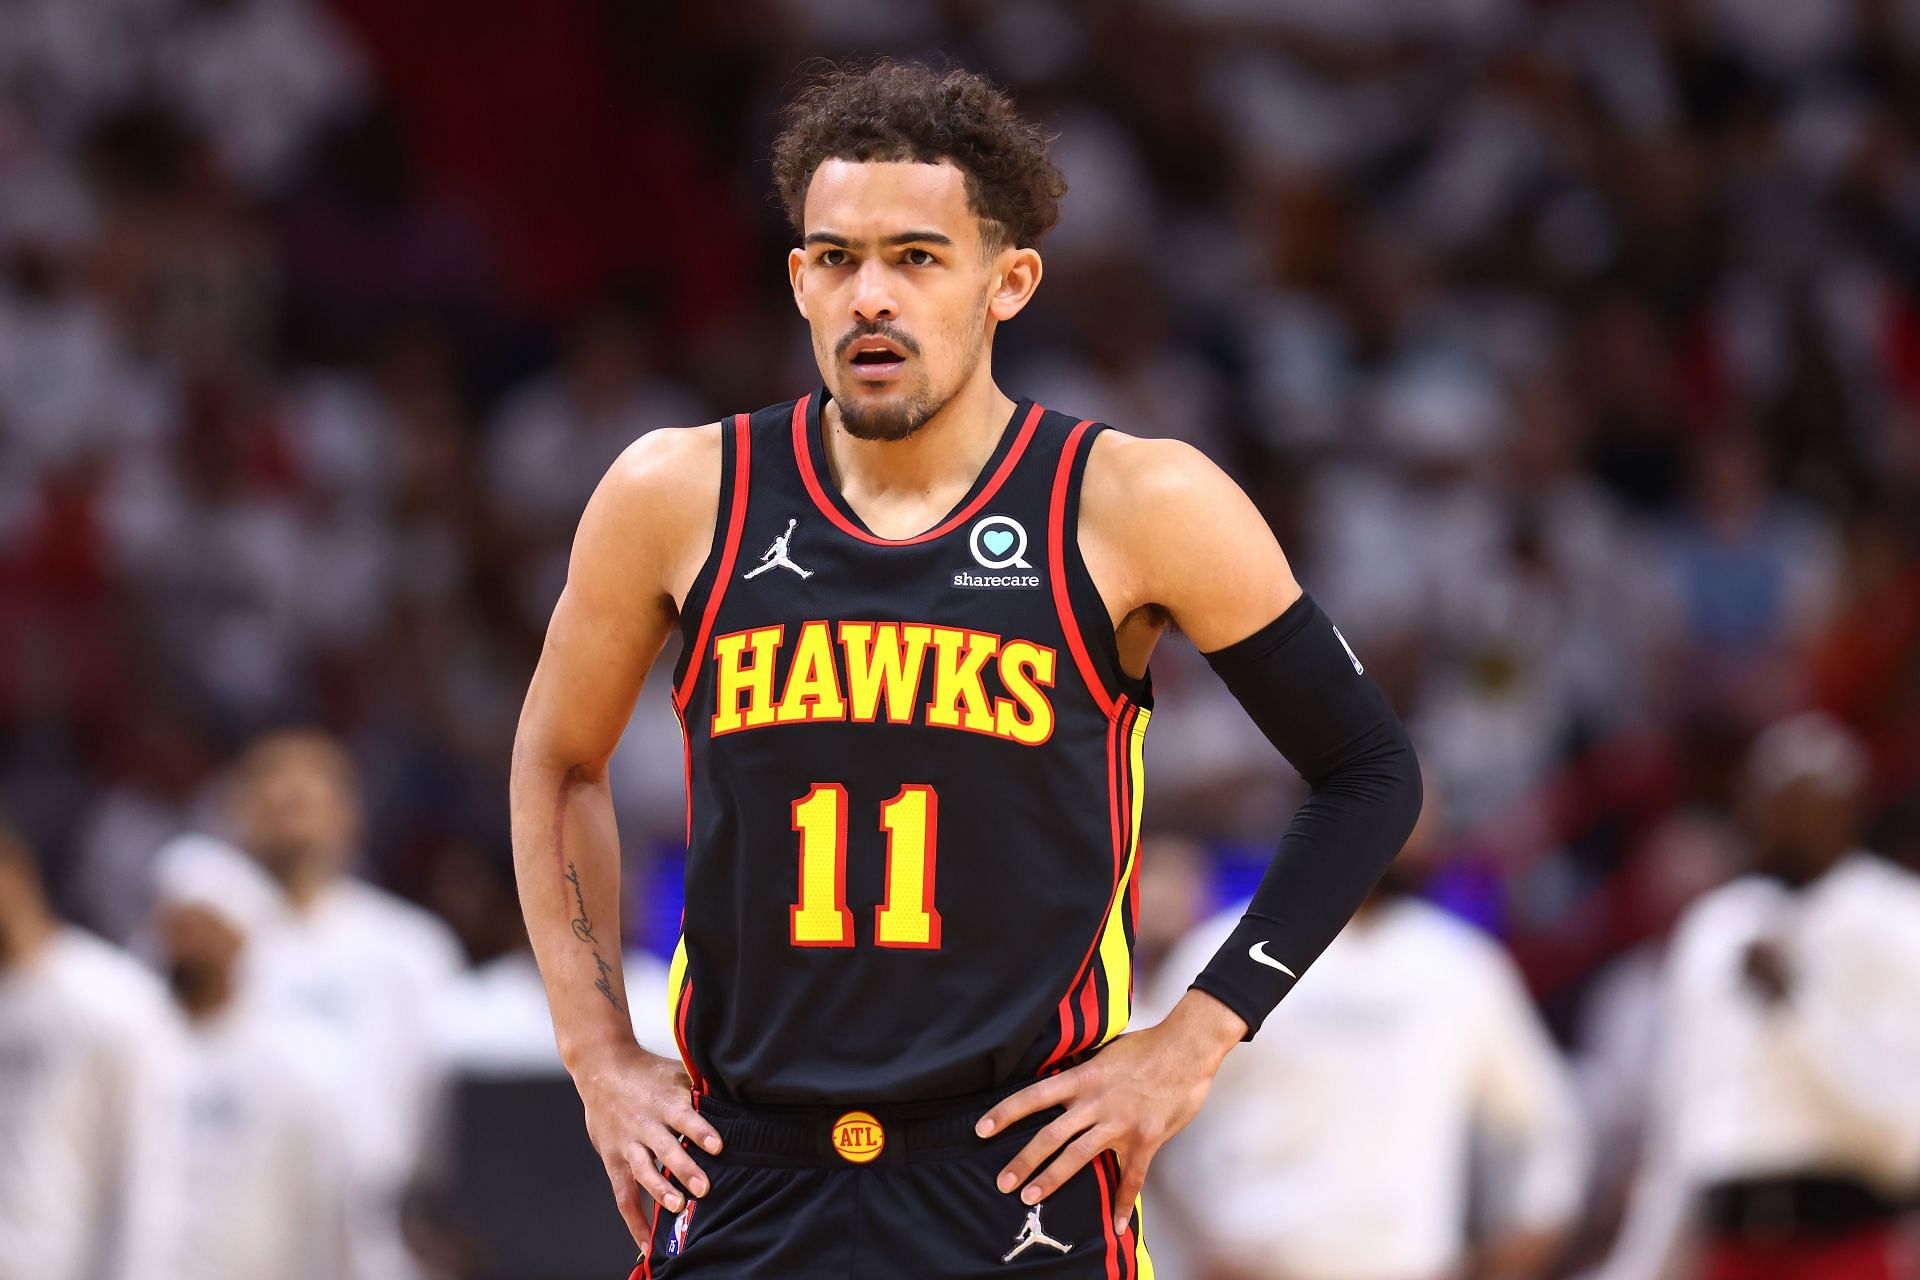 Trae Young needs to find rhythm to give the Hawks a realistic chance